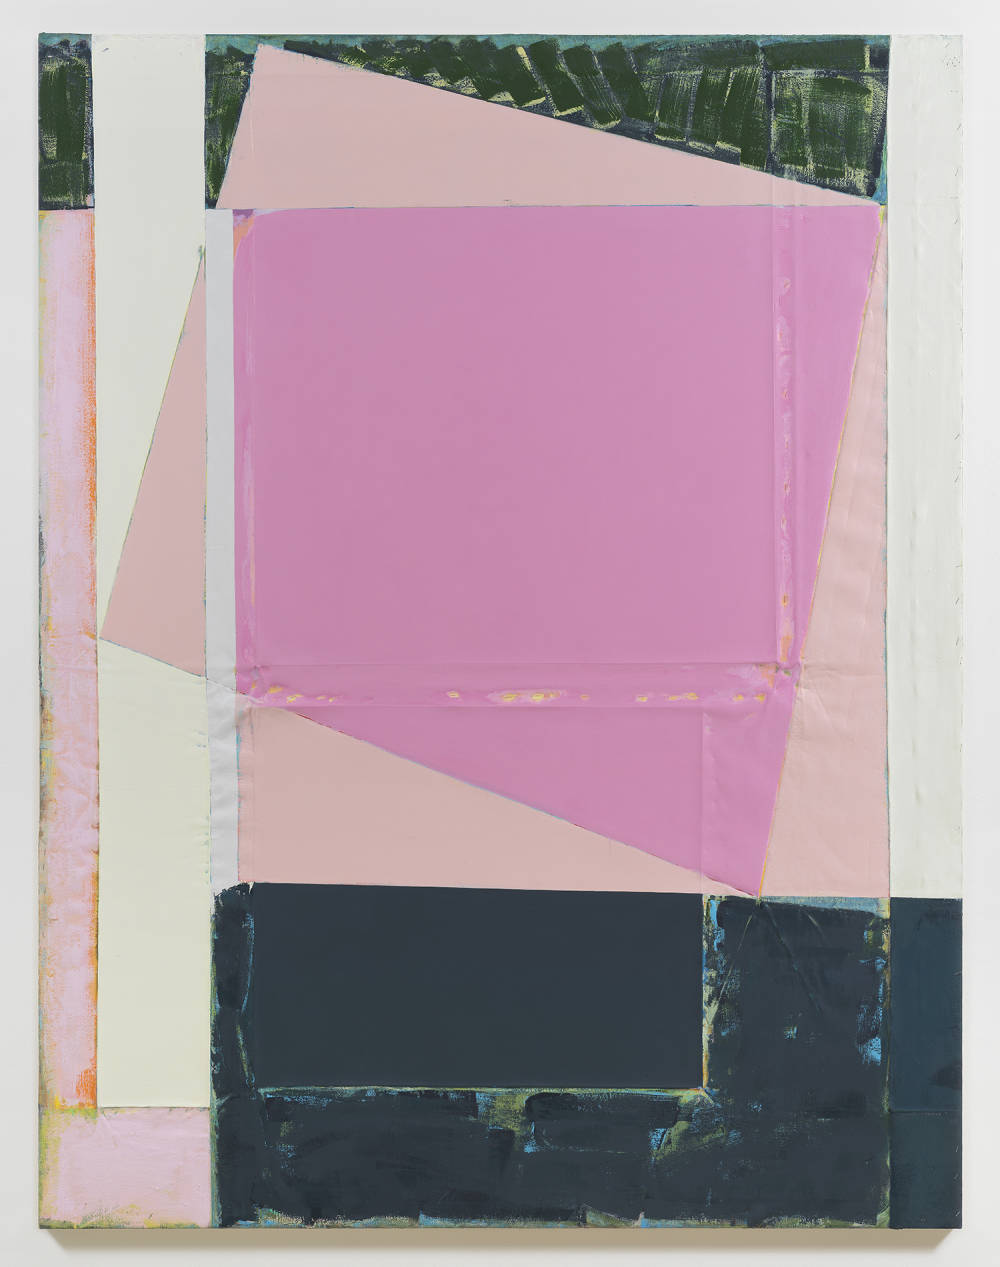 A large abstract painting consisting of several isolated rectangular forms separated by folds or creases in the canvas. The dominant colors are shades of pink, dark-blue, green, and white. The paint is thickly applied and rough.